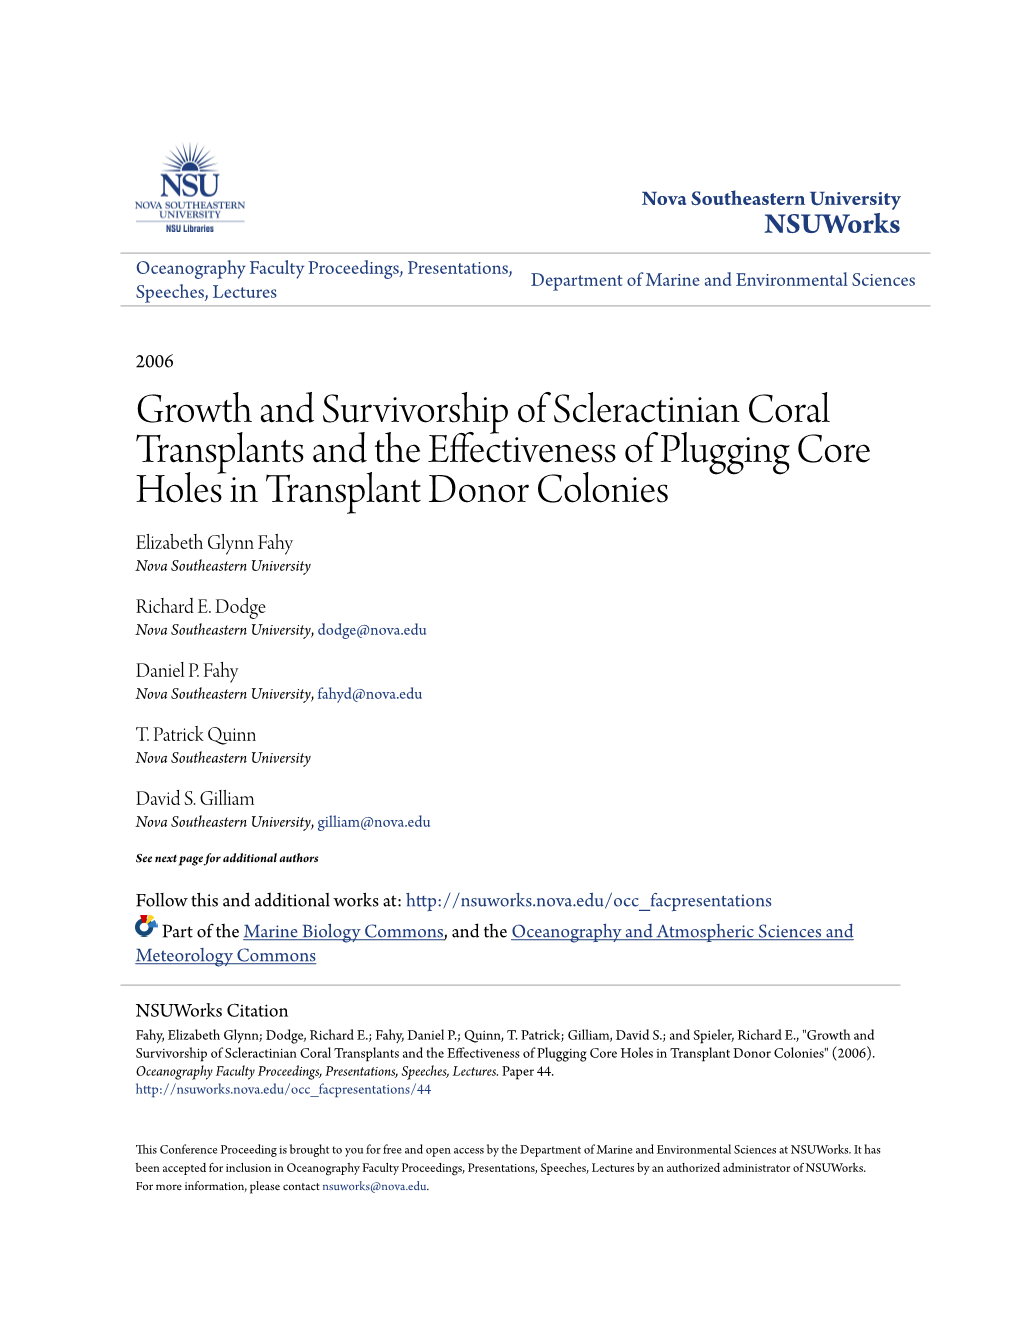 Growth and Survivorship of Scleractinian Coral Transplants And